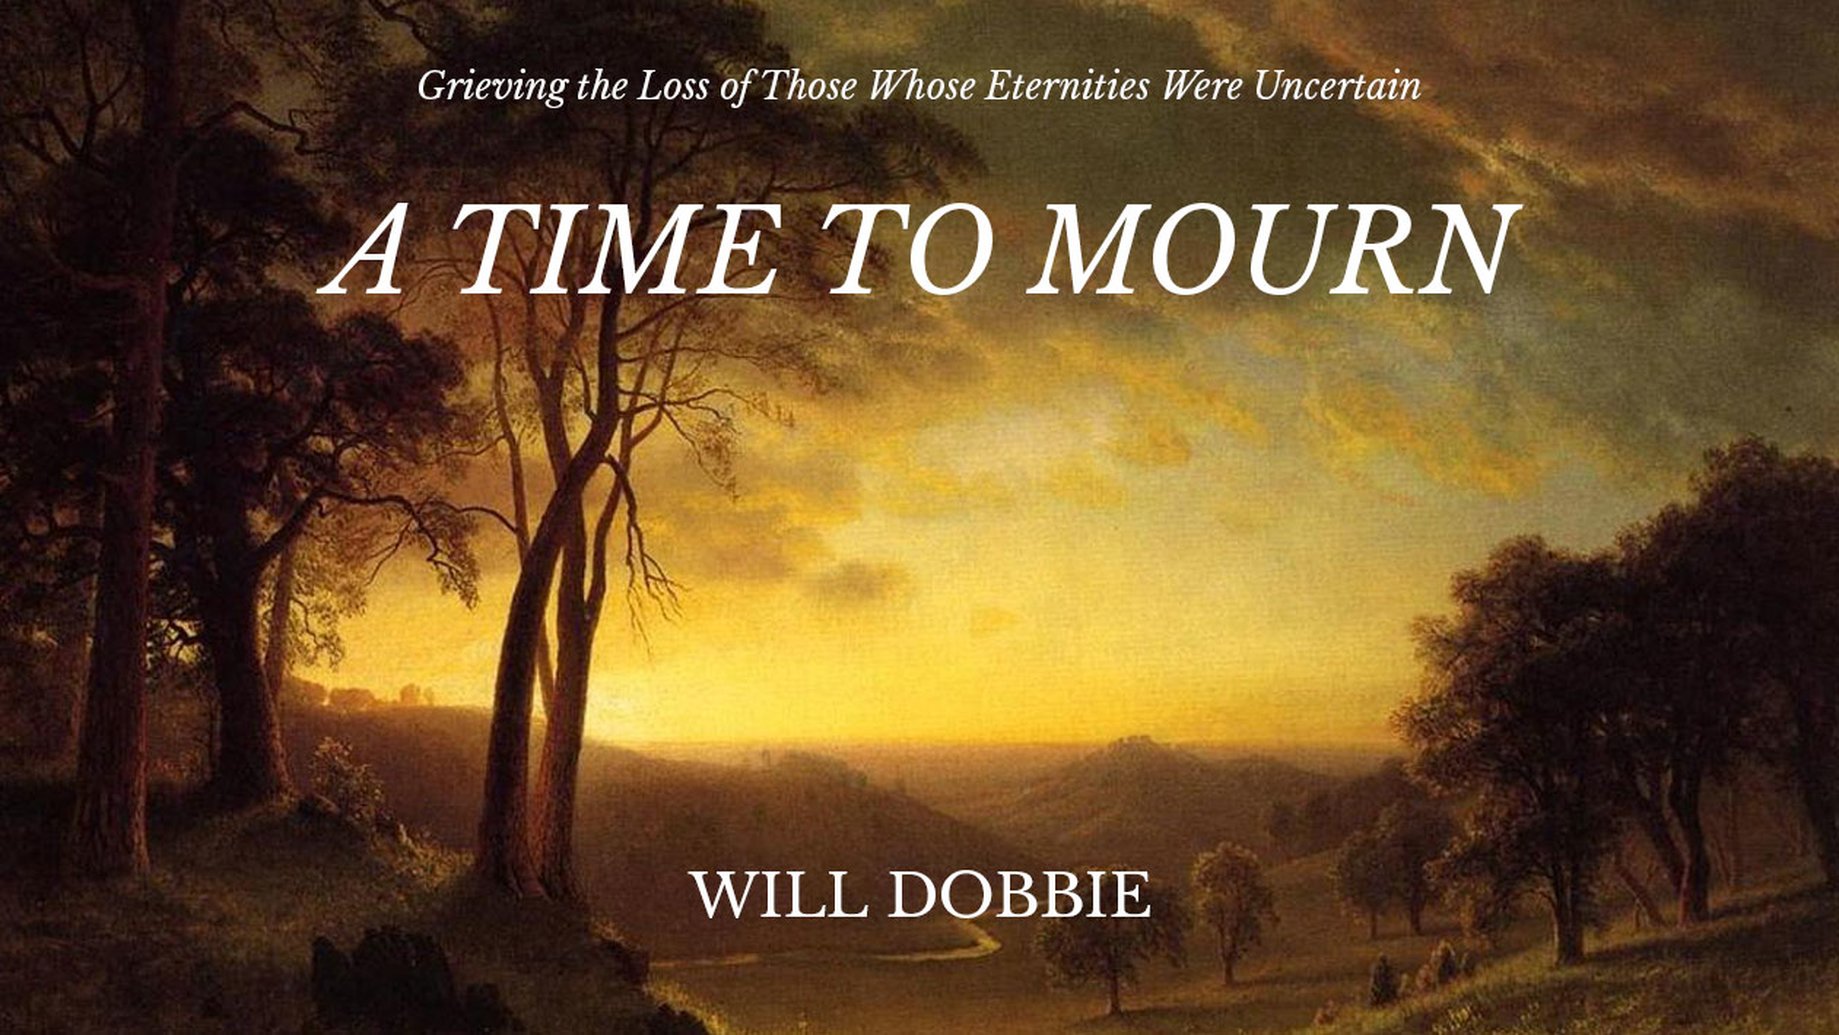 A Time to Mourn: Grieving the Loss of Those Whose Eternities Were Uncertain